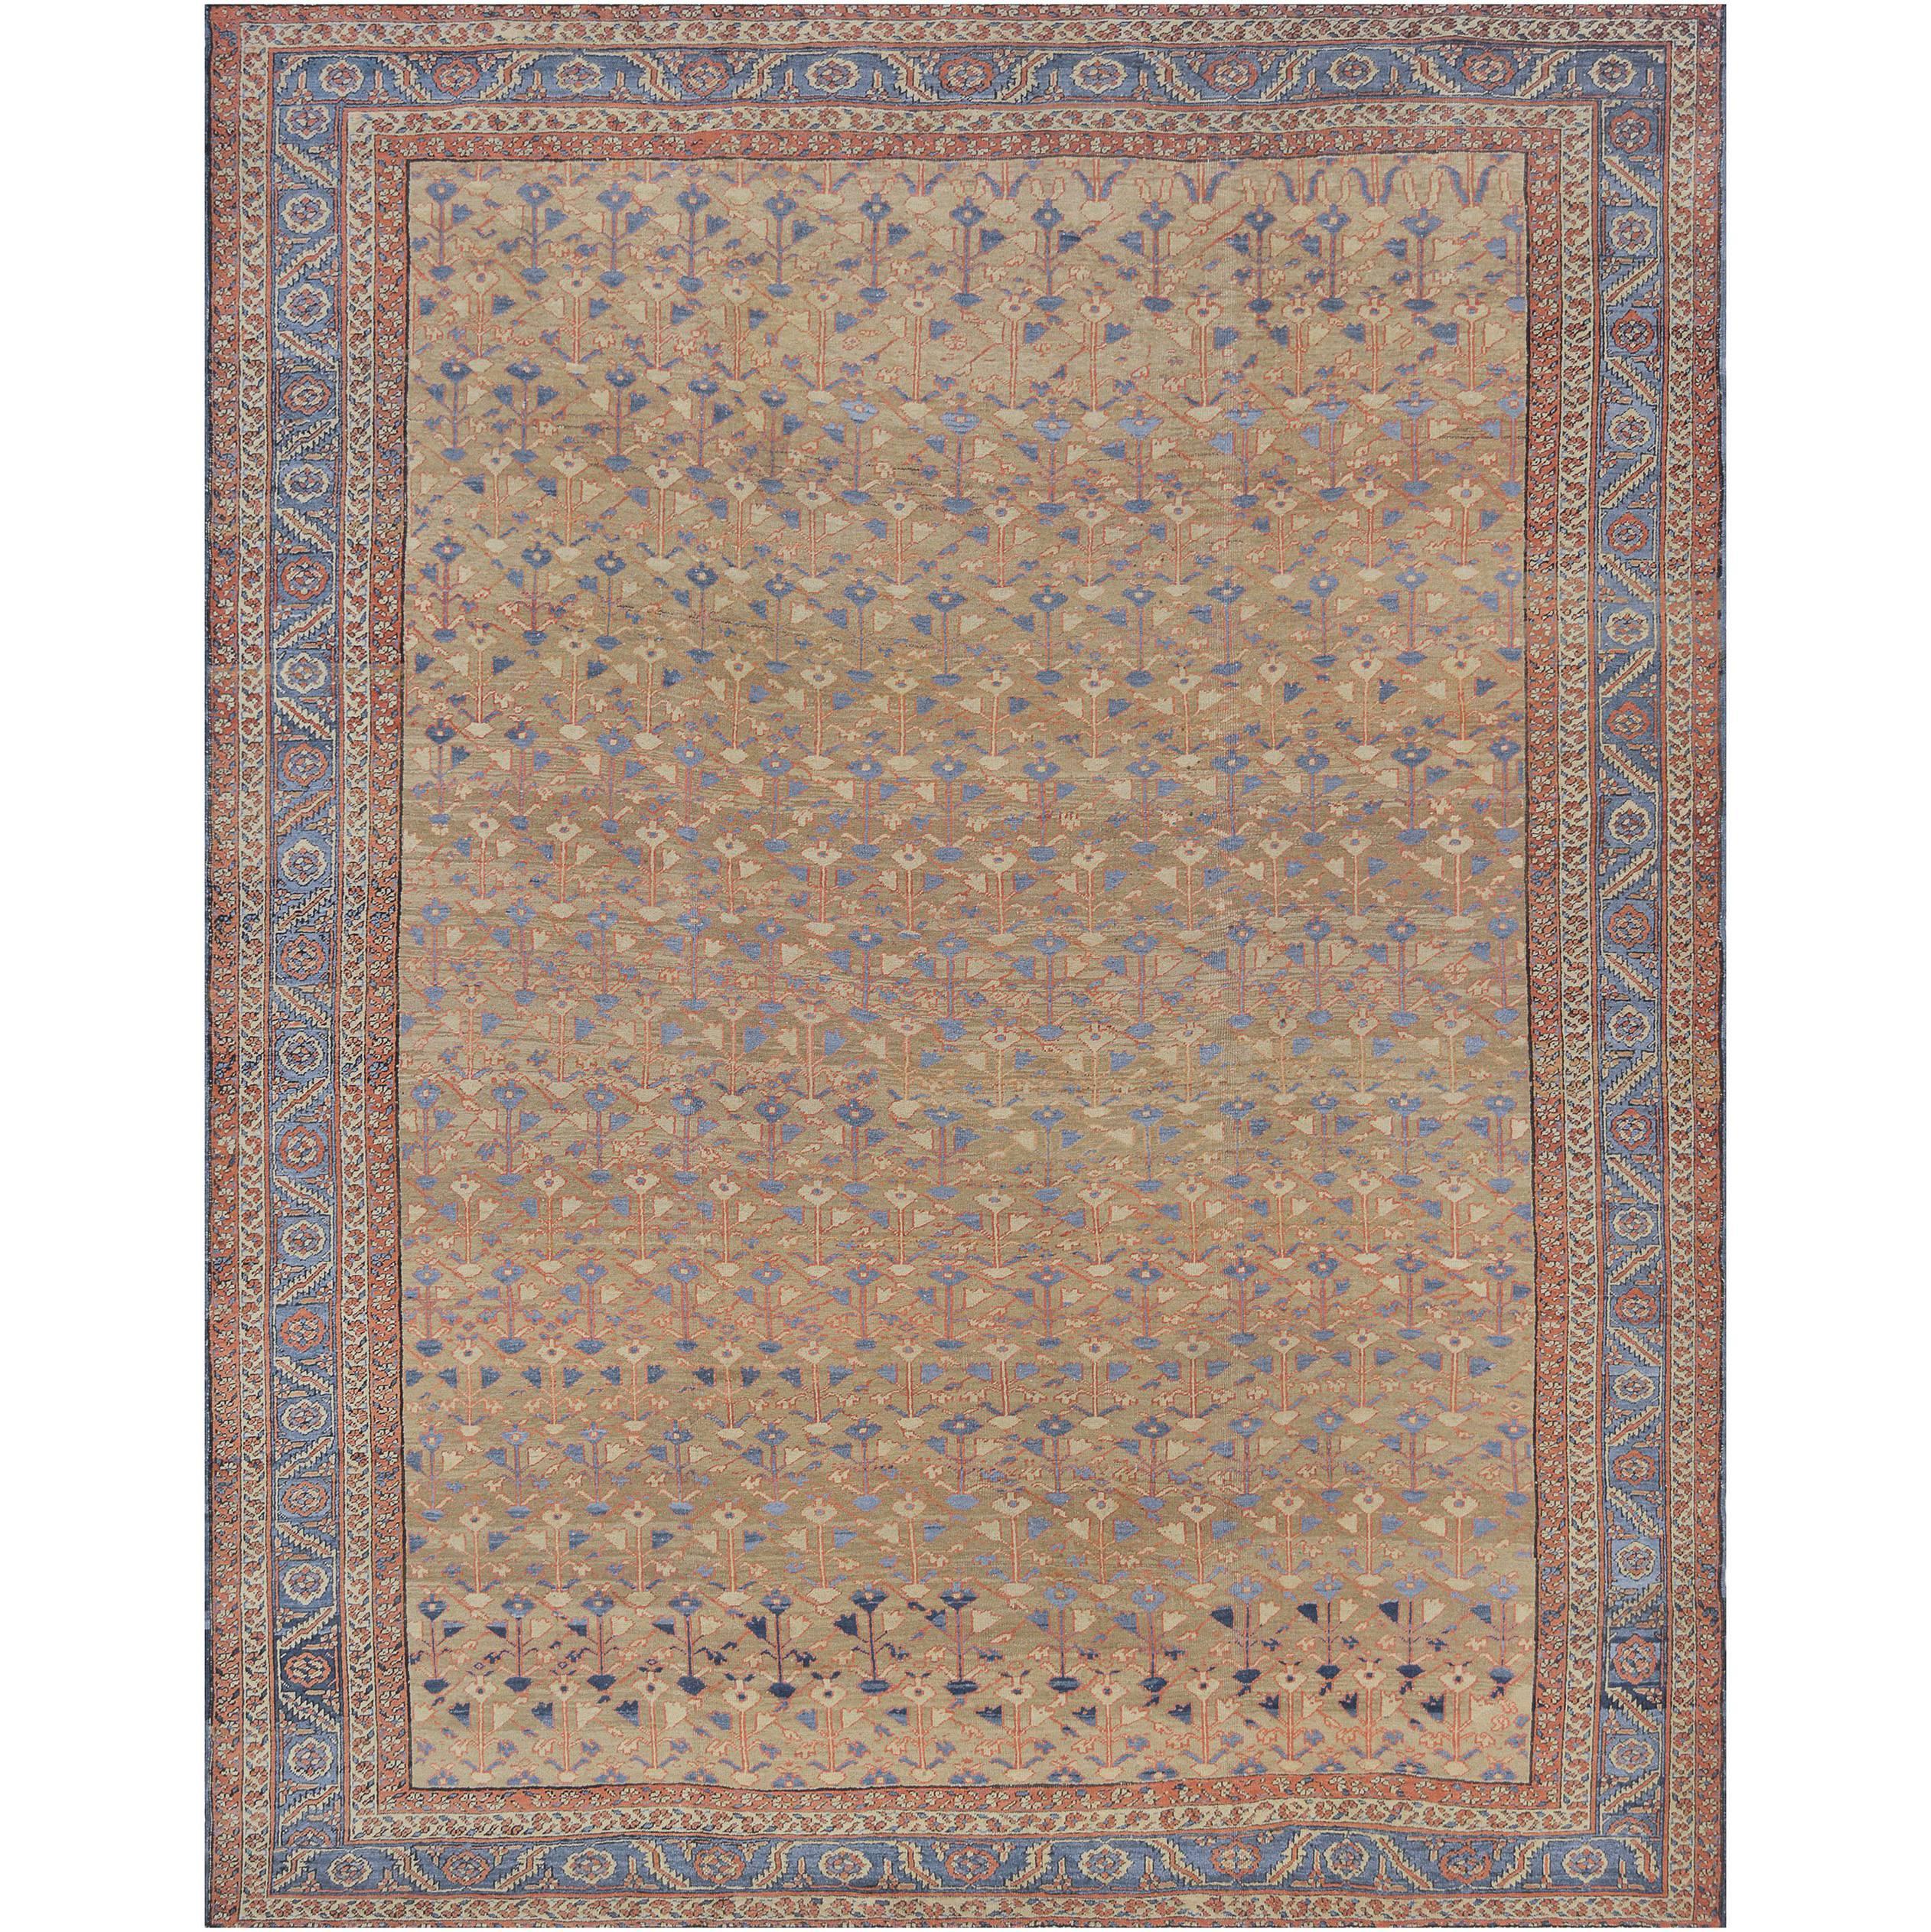 This traditional handwoven wool Persian Bakhshaish rug has a shaded beige overall field of stylized stalks issuing delicate floral motif forming an intricate vine network, in a gorgeous shaded sapphire scrolling palmette vine border, between